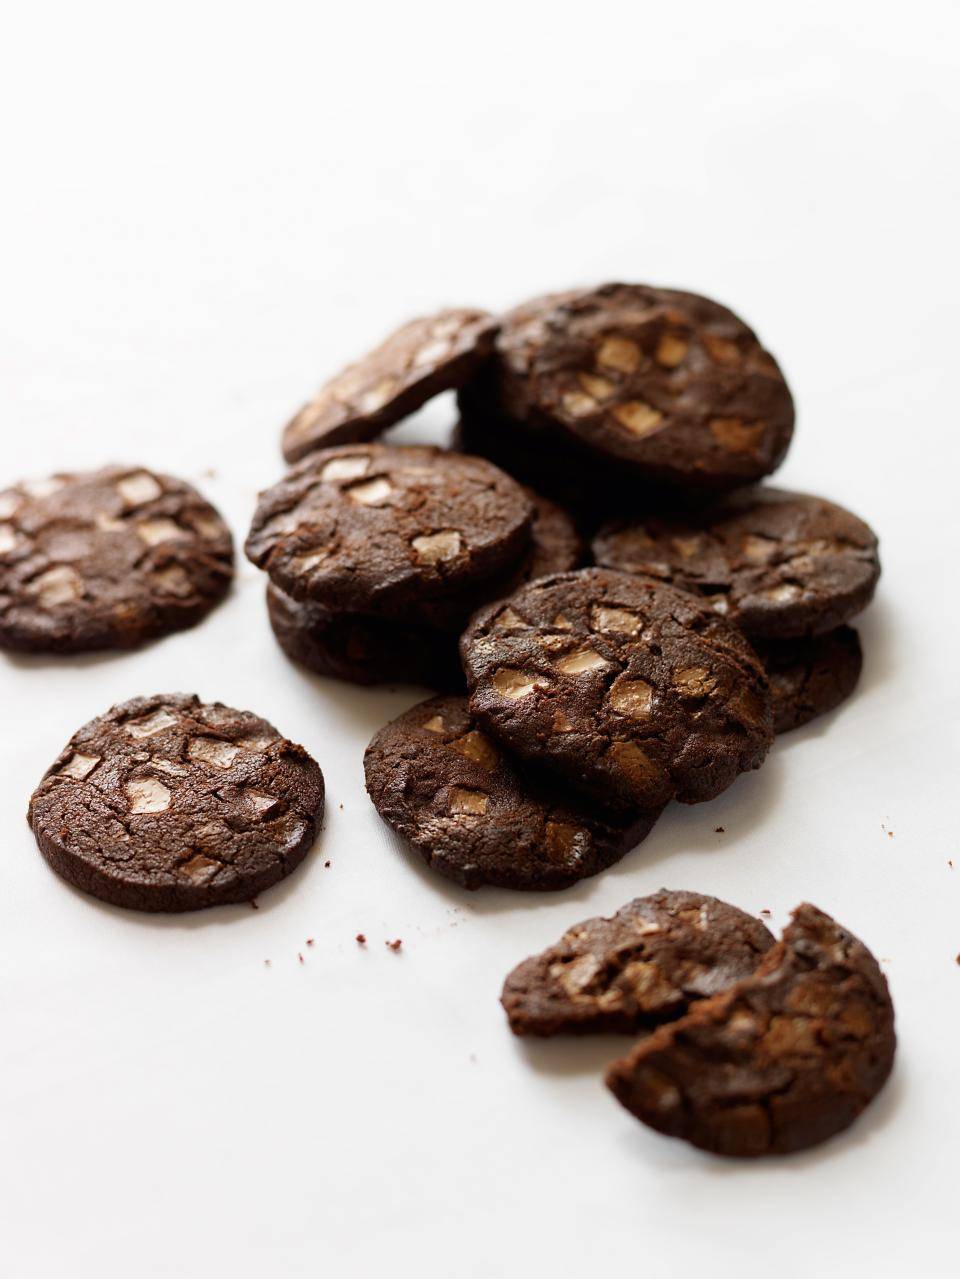 Chocolate Cookies. Photo: Courtesy of Le Gavroche